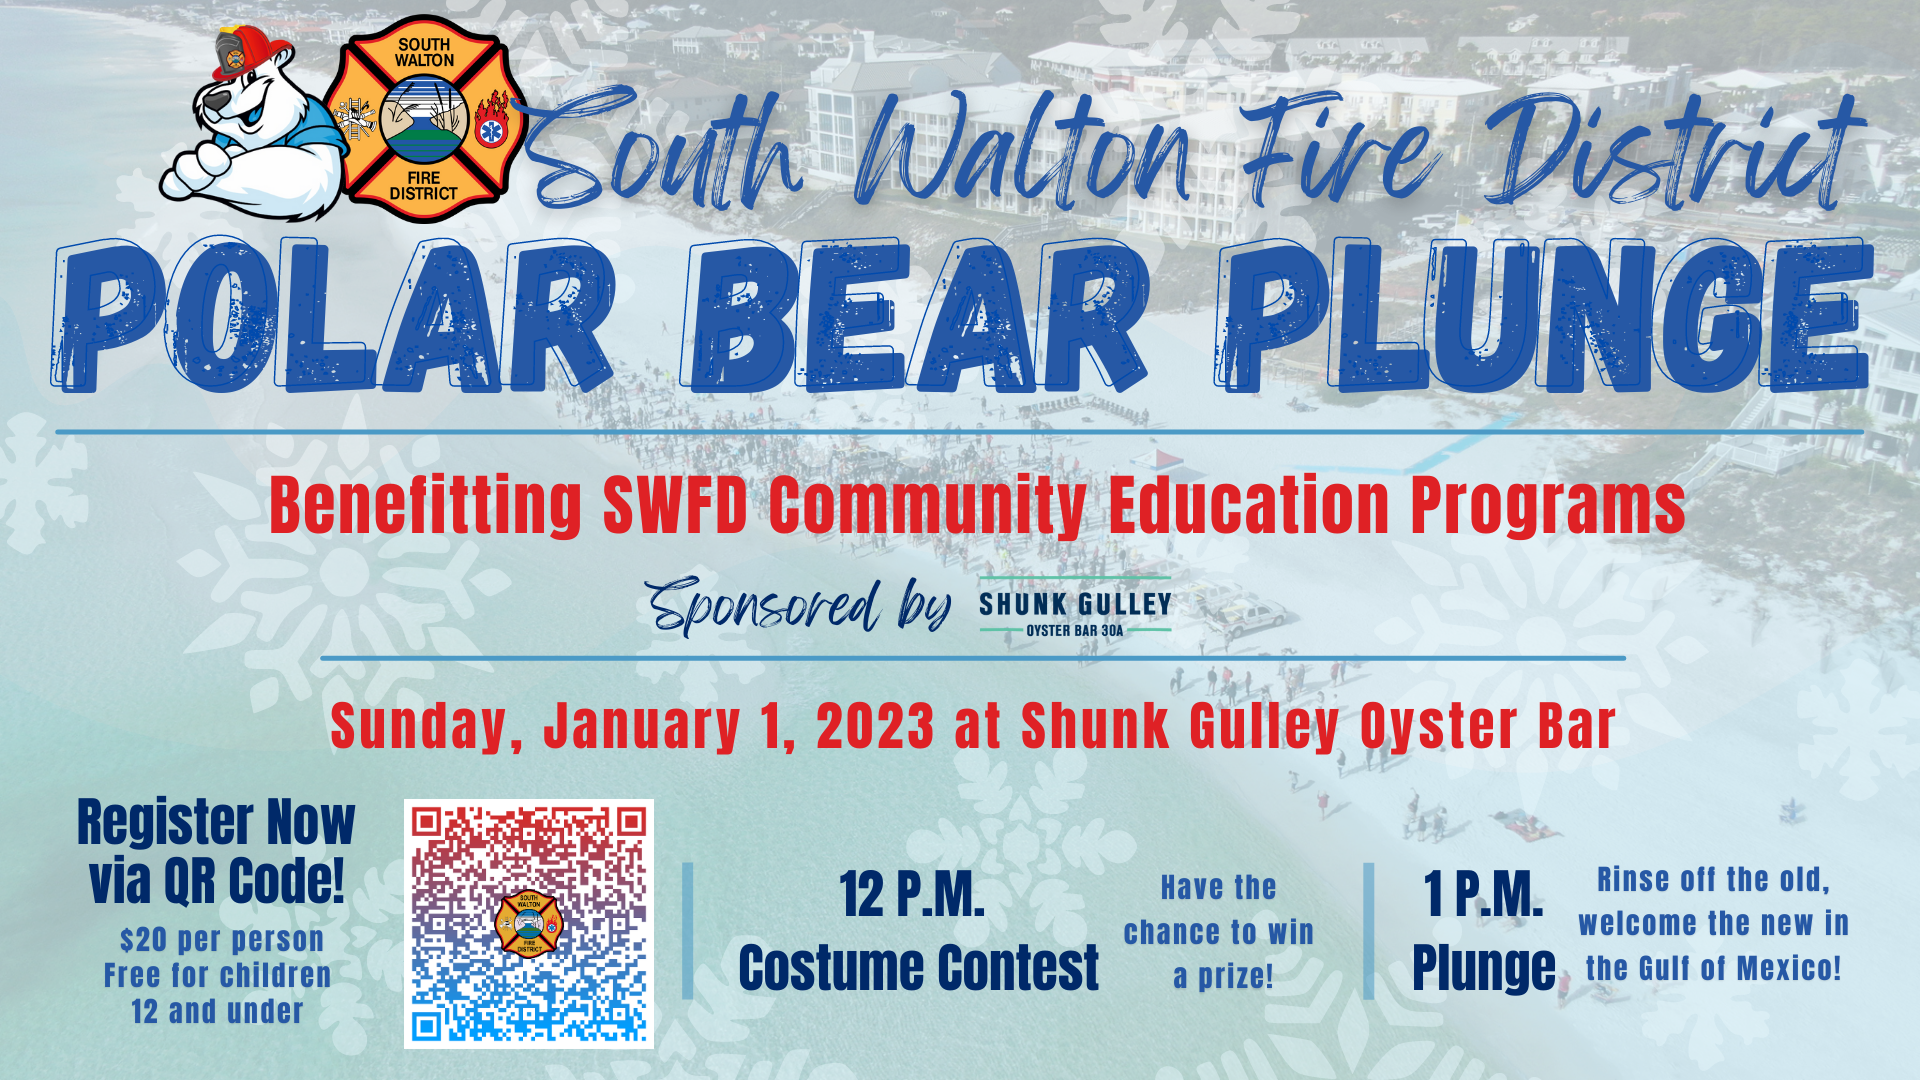 South Walton Fire District to hold 9th Annual Polar Bear Plunge